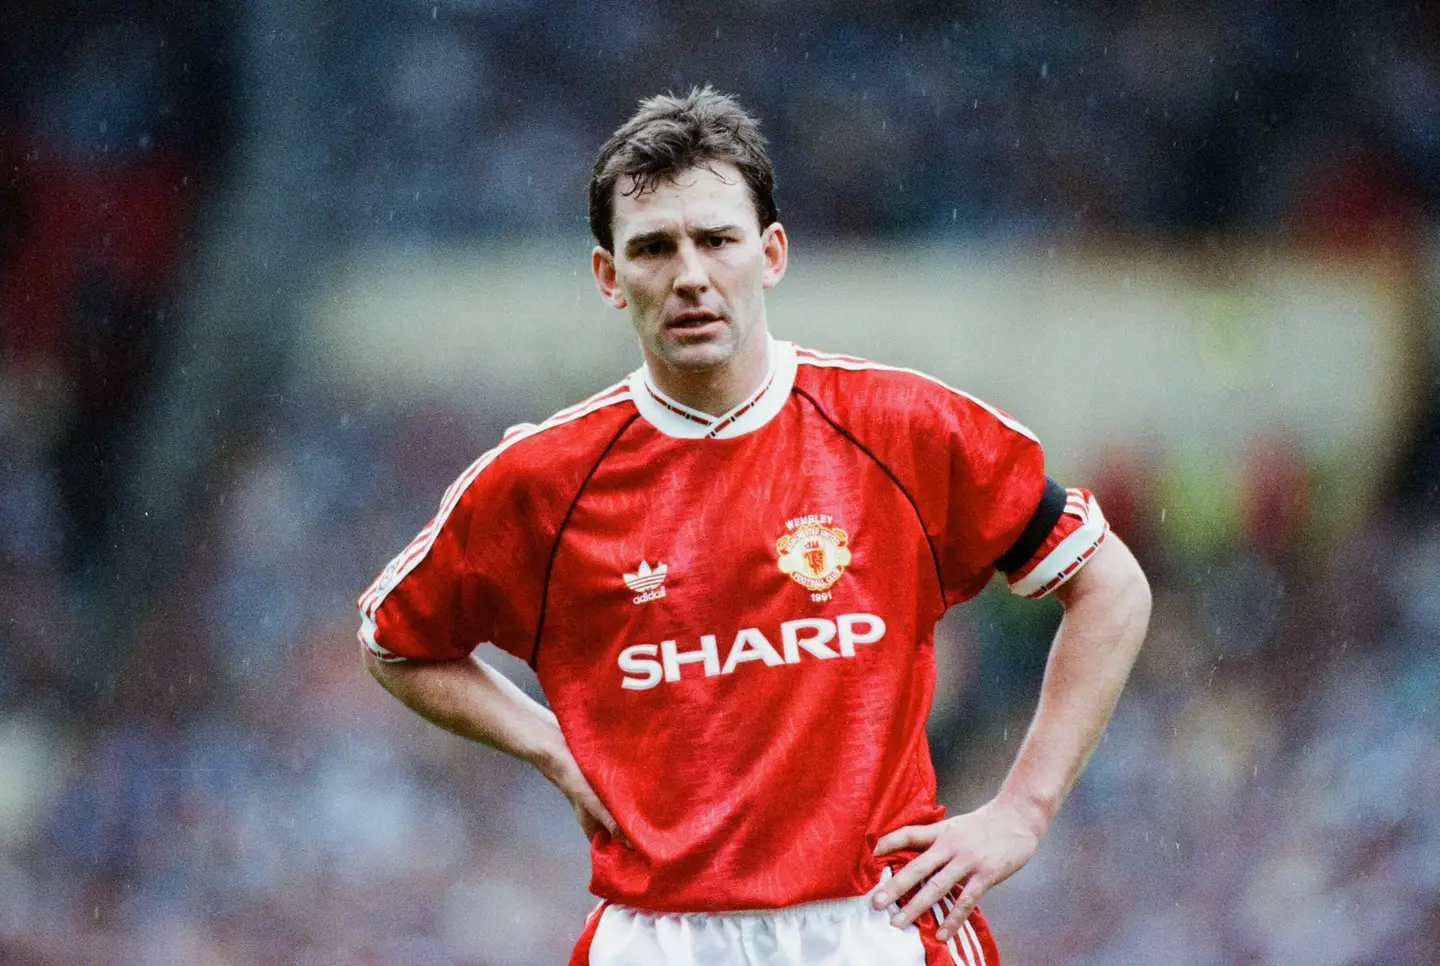 Bryan Robson as a Manchester United player in 1991